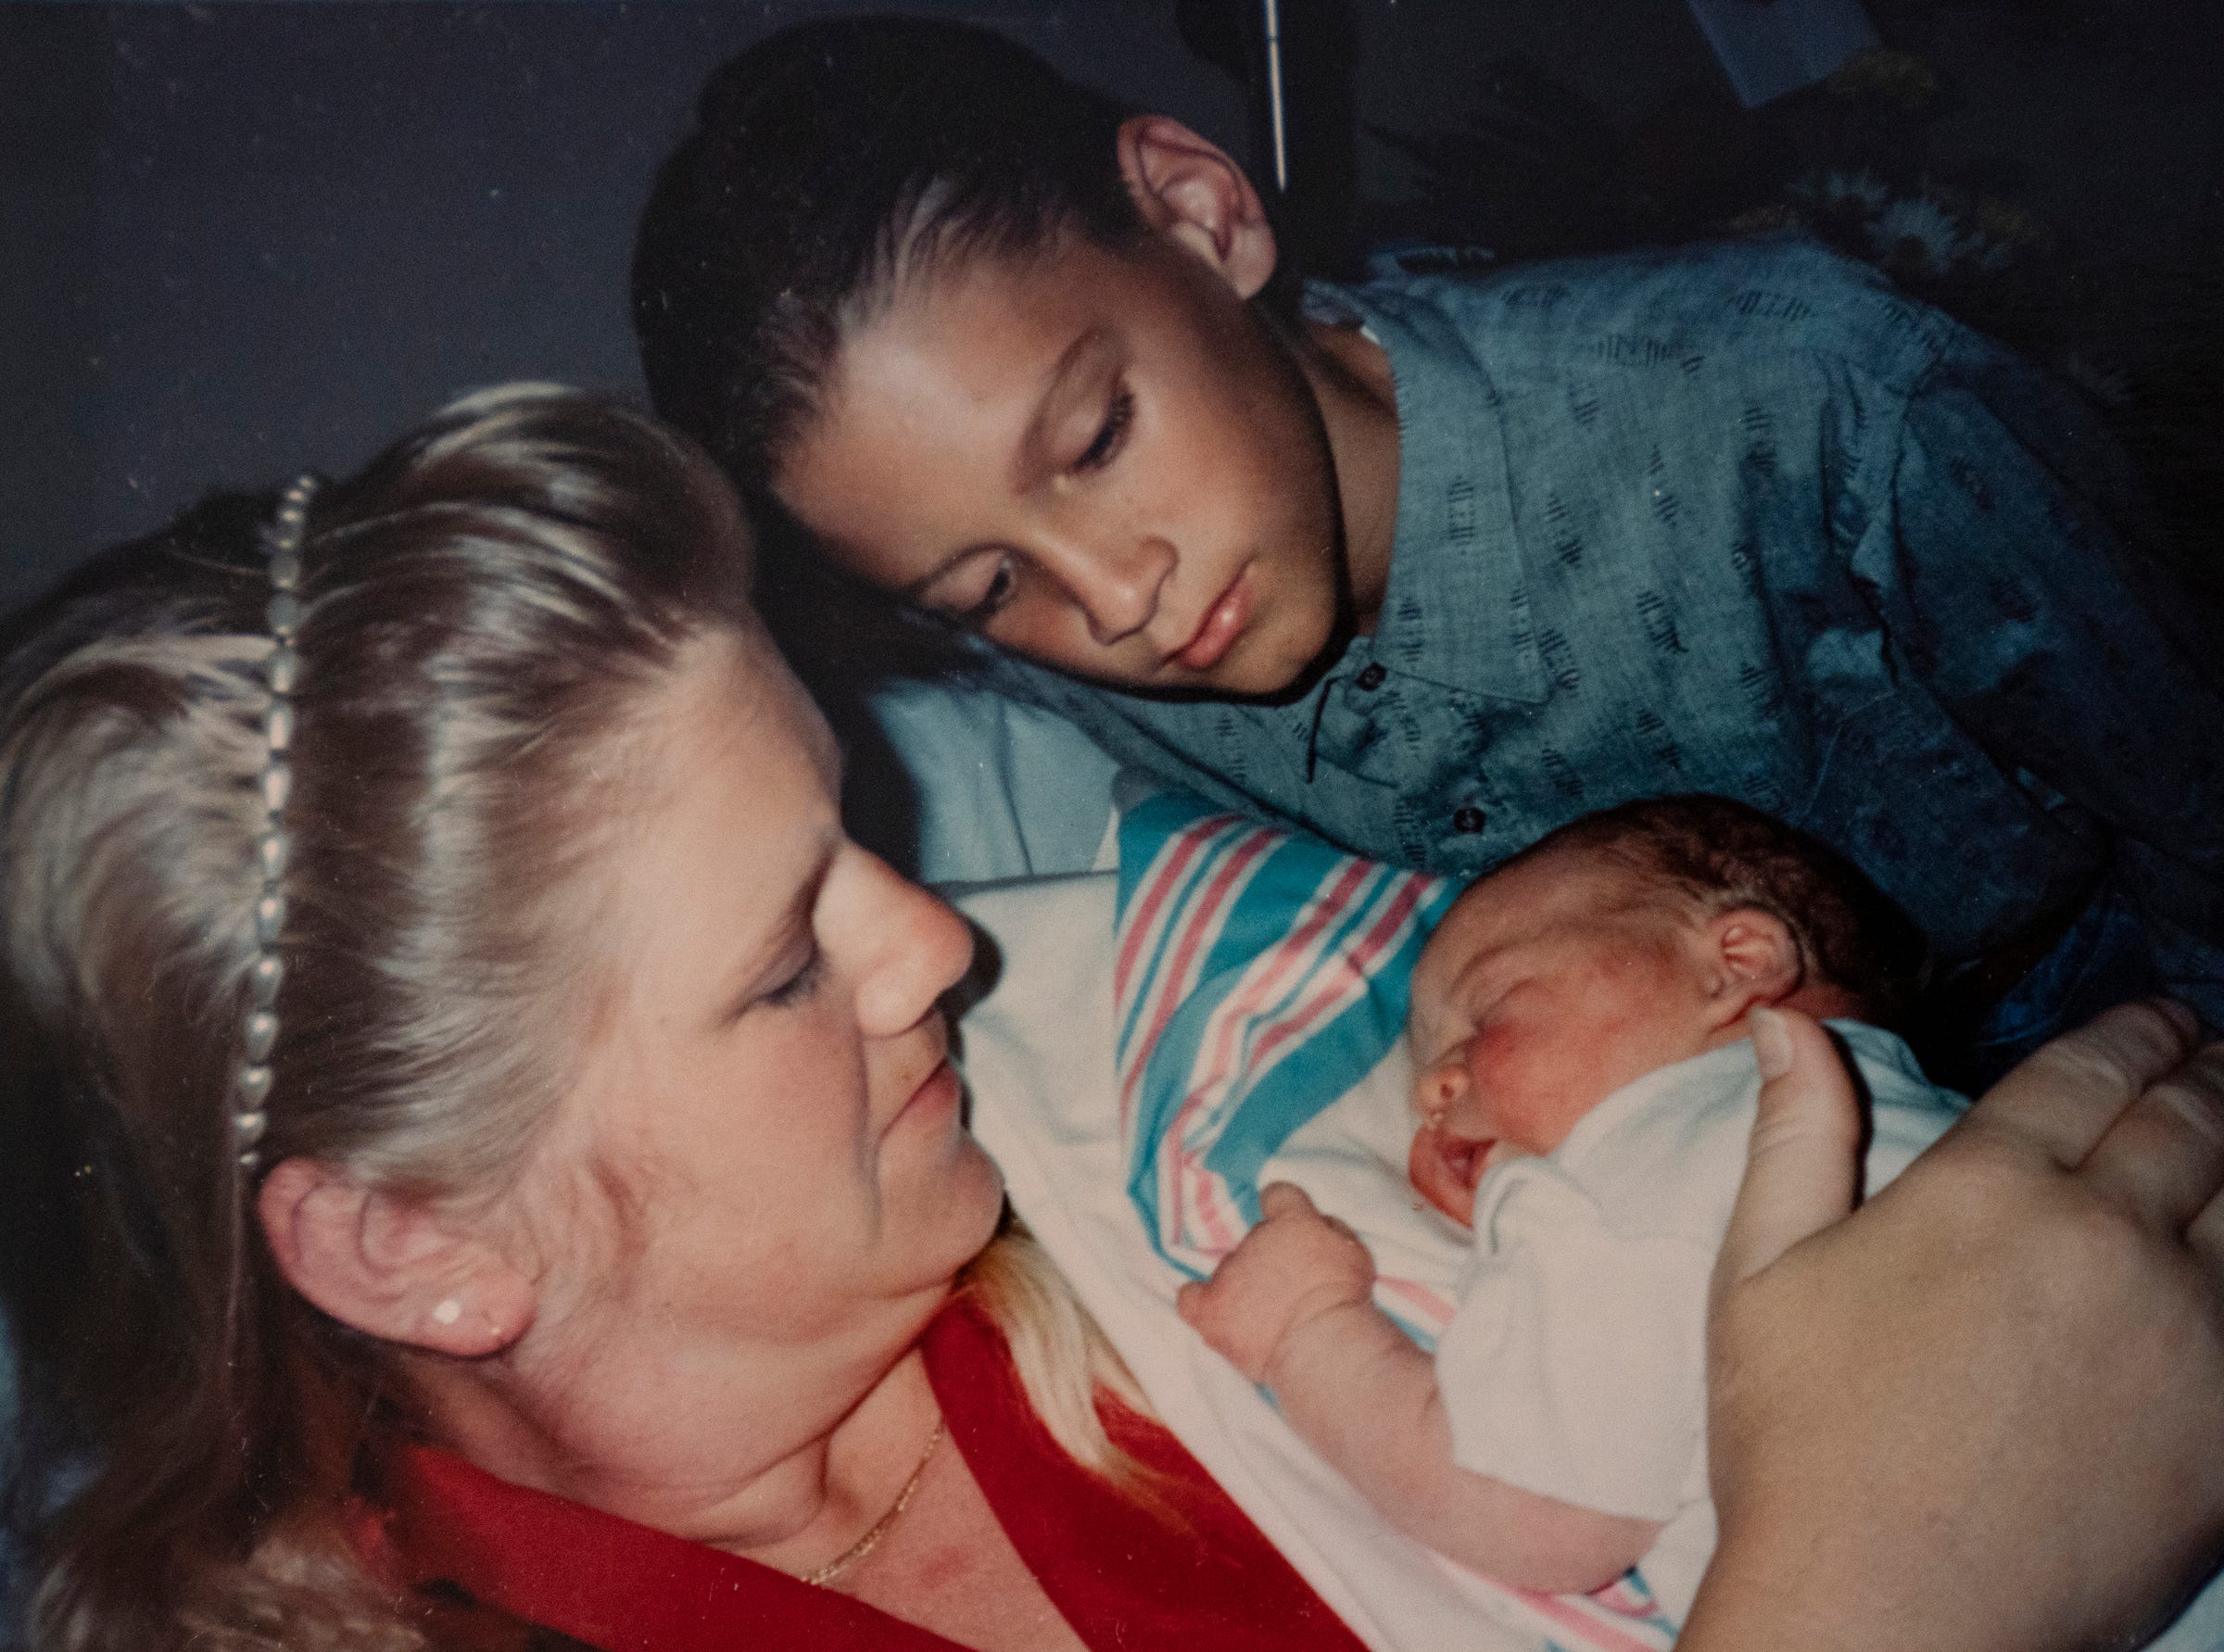 Kathi Kuykendall keeps this sentimental photo of her with baby Asa taken in 1993, when he was just a day old, and older son Eric Kuykendall looks on at right. They lived in Florida at the time. She keeps the photo at her home in Allen Park Wednesday, Nov. 3, 2021.